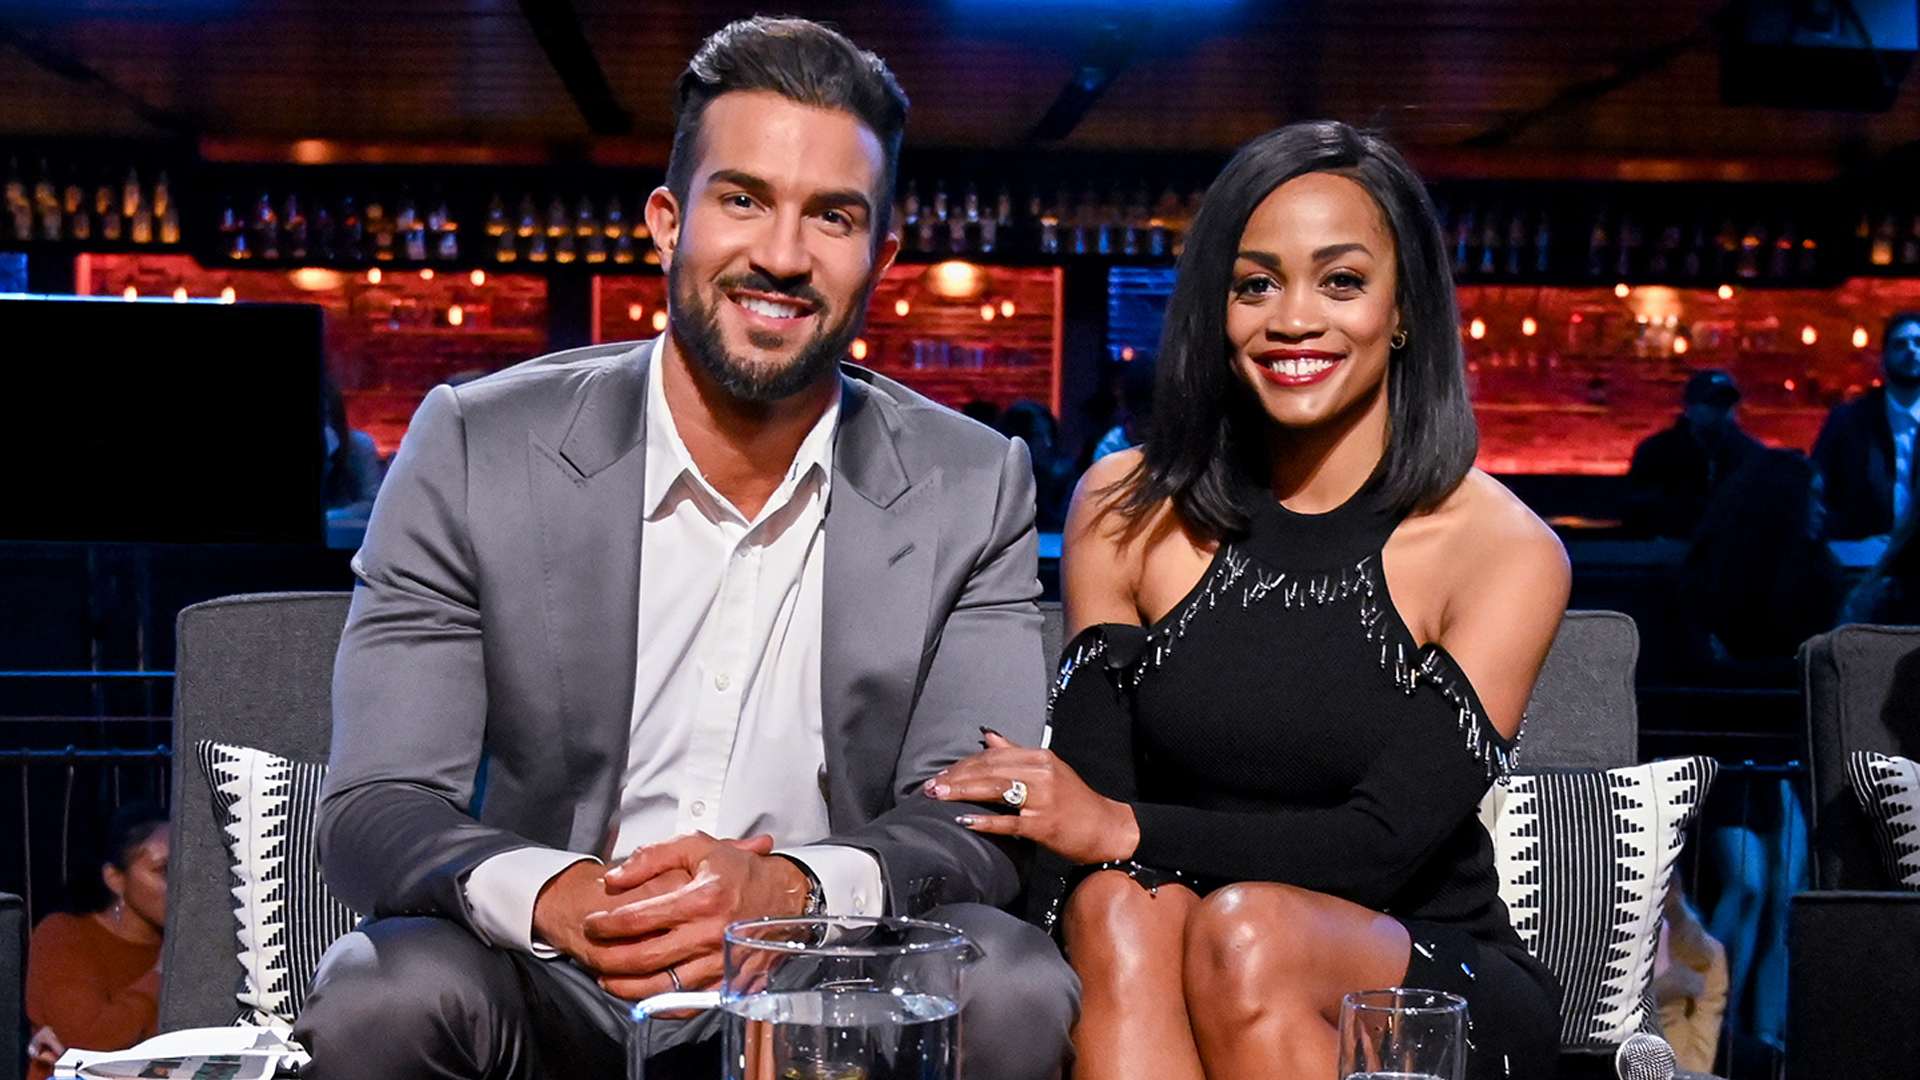 Do Rachel Lindsay and Bryan Abasolo Want Kids? The Former Bachelorette Opens Up About Expanding Her Family